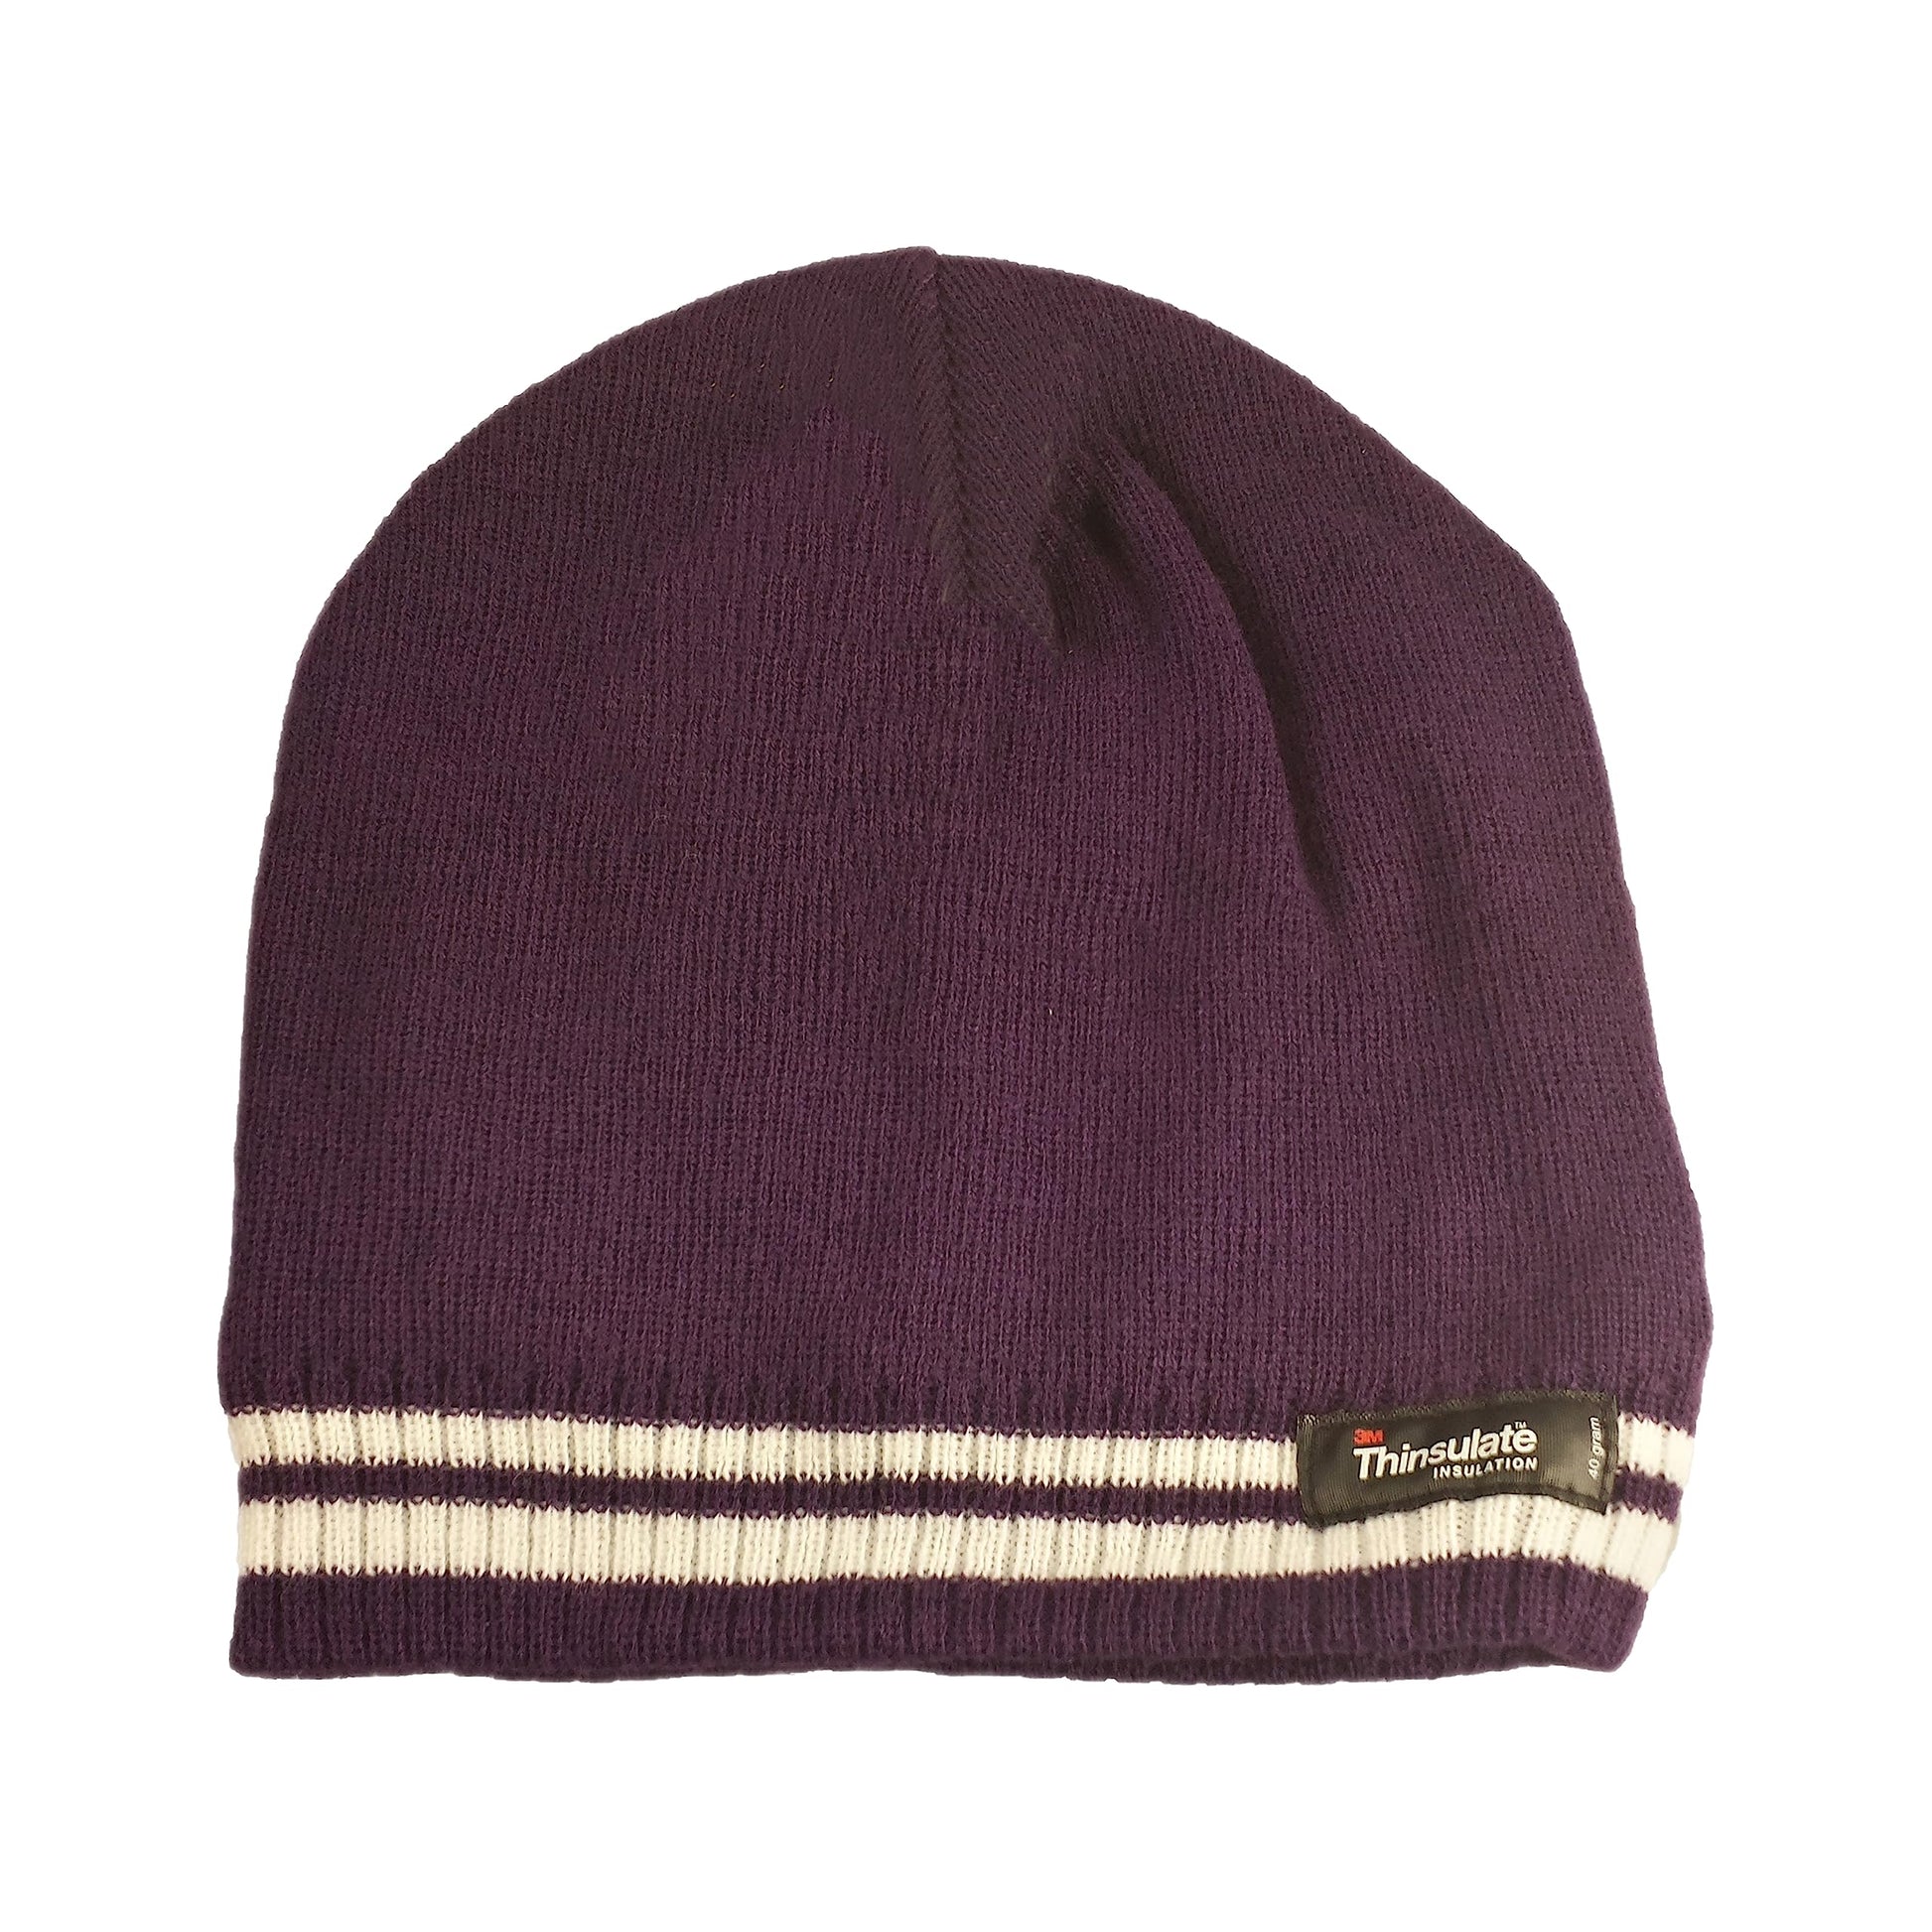 Women's Stripe Design Hat With 3M Thinsulate Insulation Thermal Beanie Hats. Buy now for £8.00. A Hats by Sock Stack. 3M, beanie, Beanie Hat, black, cream, fleece, hat, Hats, insulation, Insulation Hat, Knitted, navy, outdoor, purple, red, soft, stripe, s